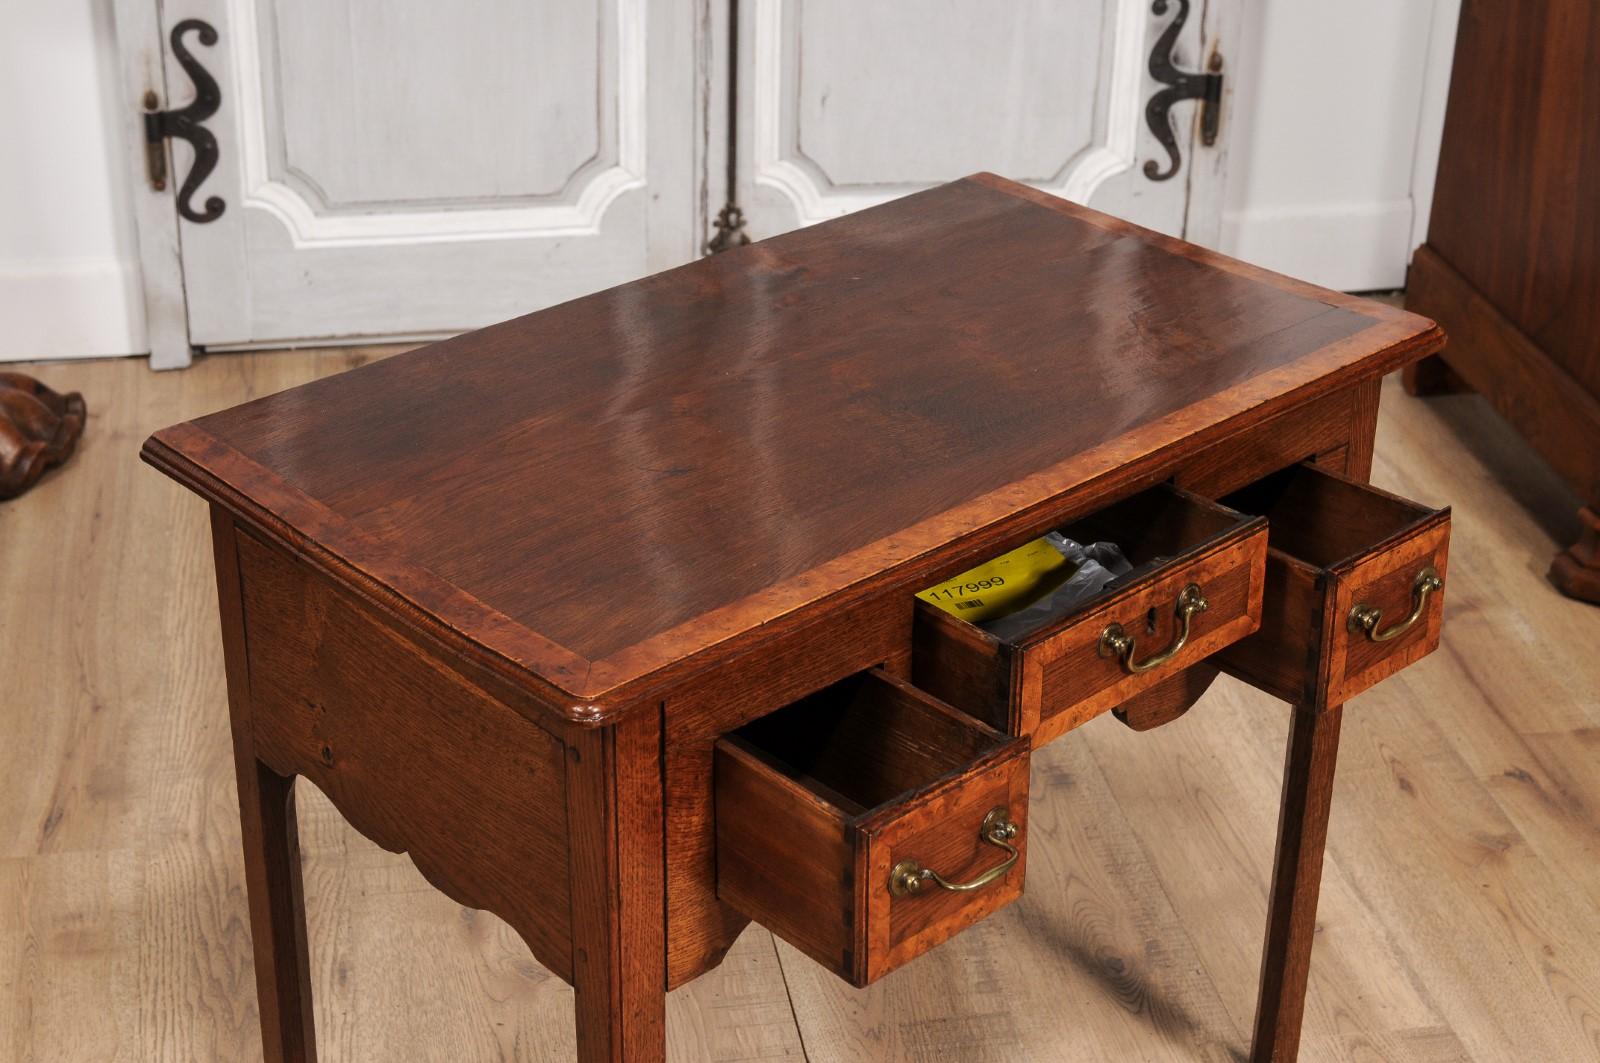 18th Century and Earlier English Georgian Period 18th Century Oak Lowboy Side Table with Carved Apron